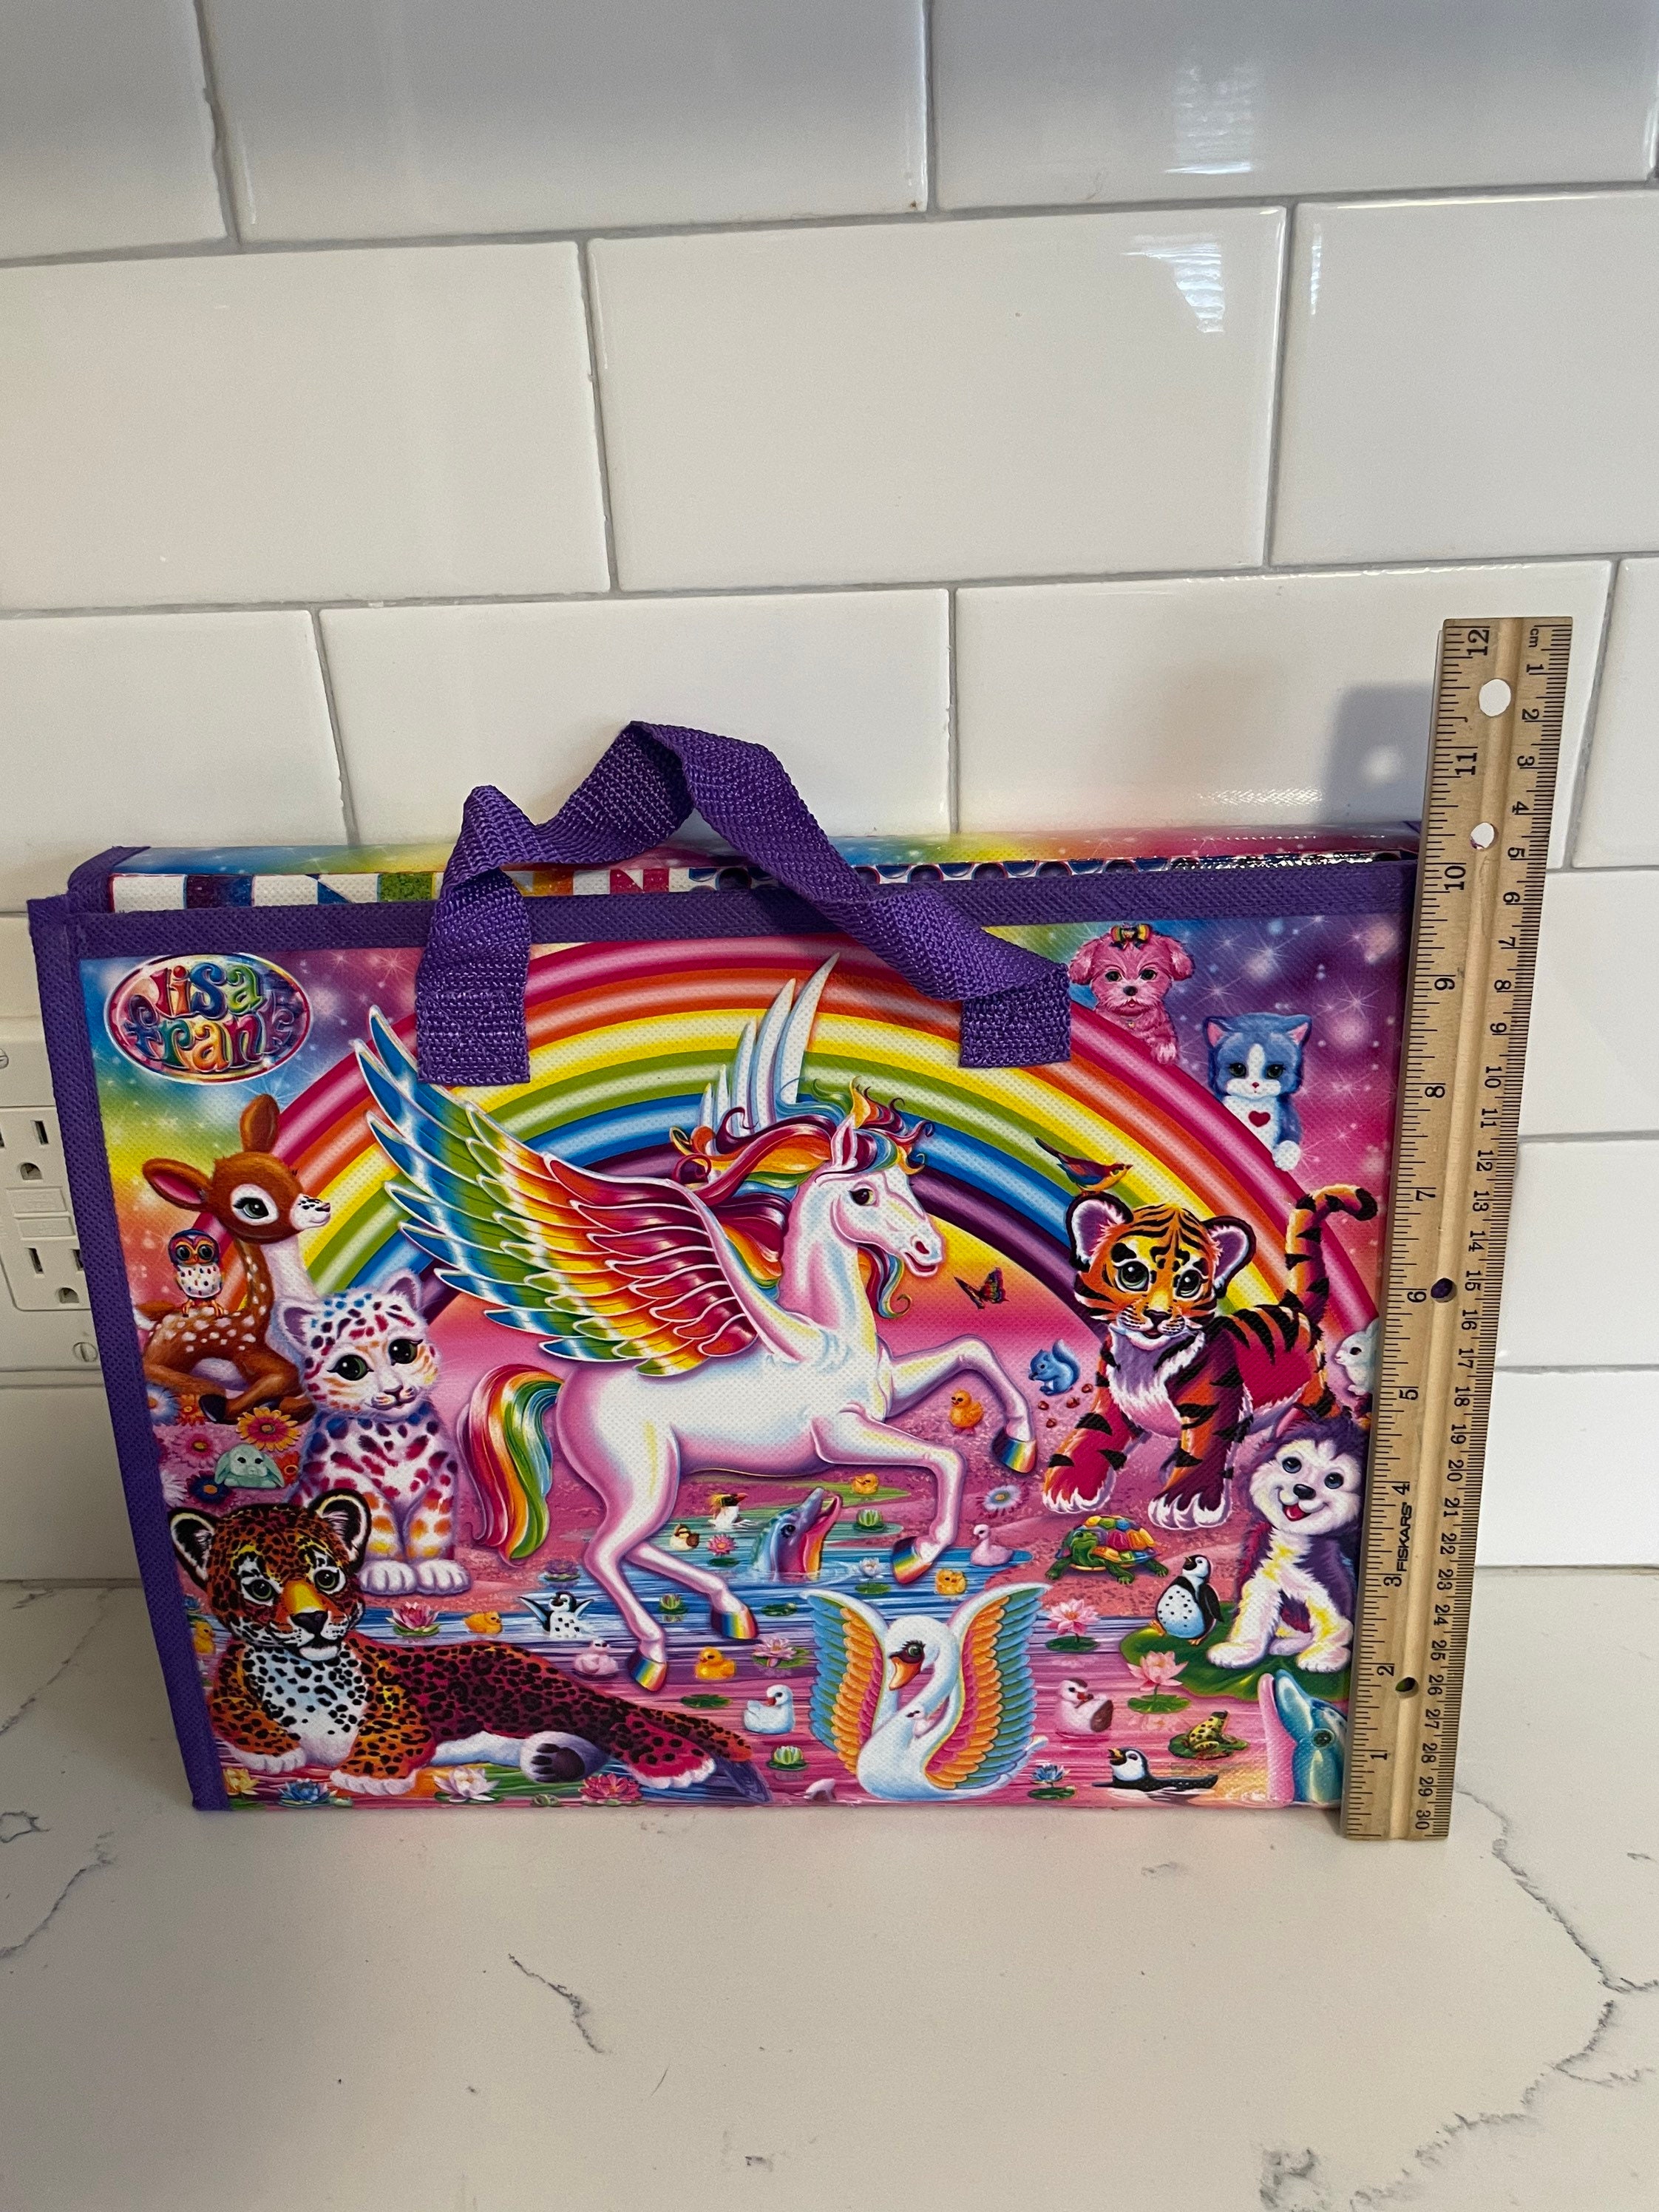 Bendon Lisa Frank Coloring & Activity Set with Fold Out Storage Case